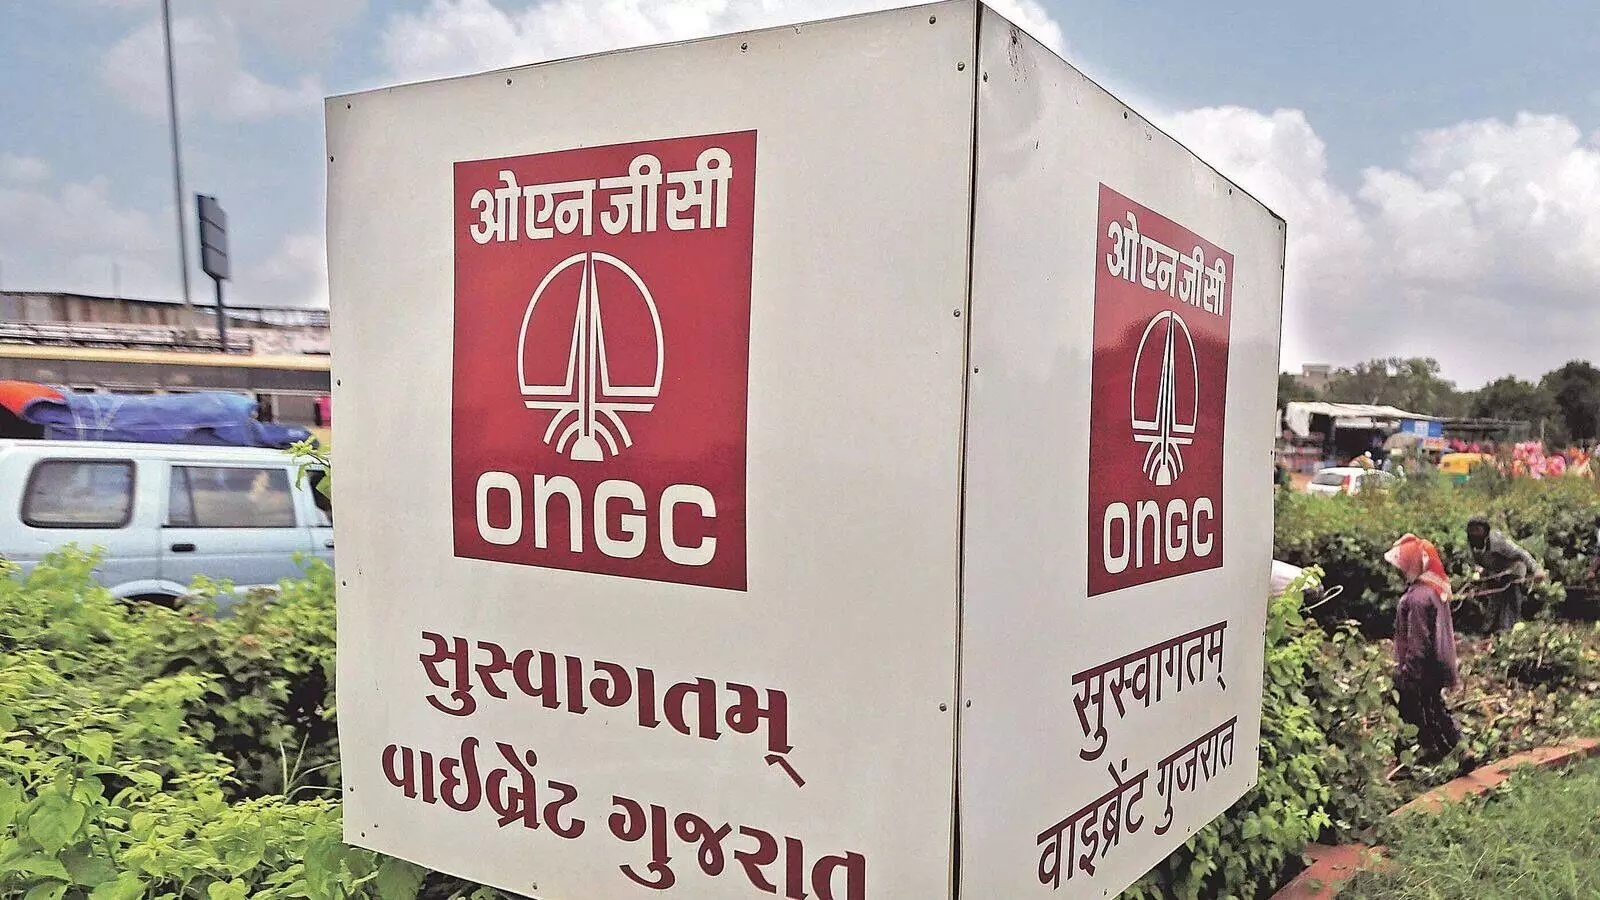 ONGC Videsh to raise upto Rs 5,000 cr via debentures to fund capex, assets